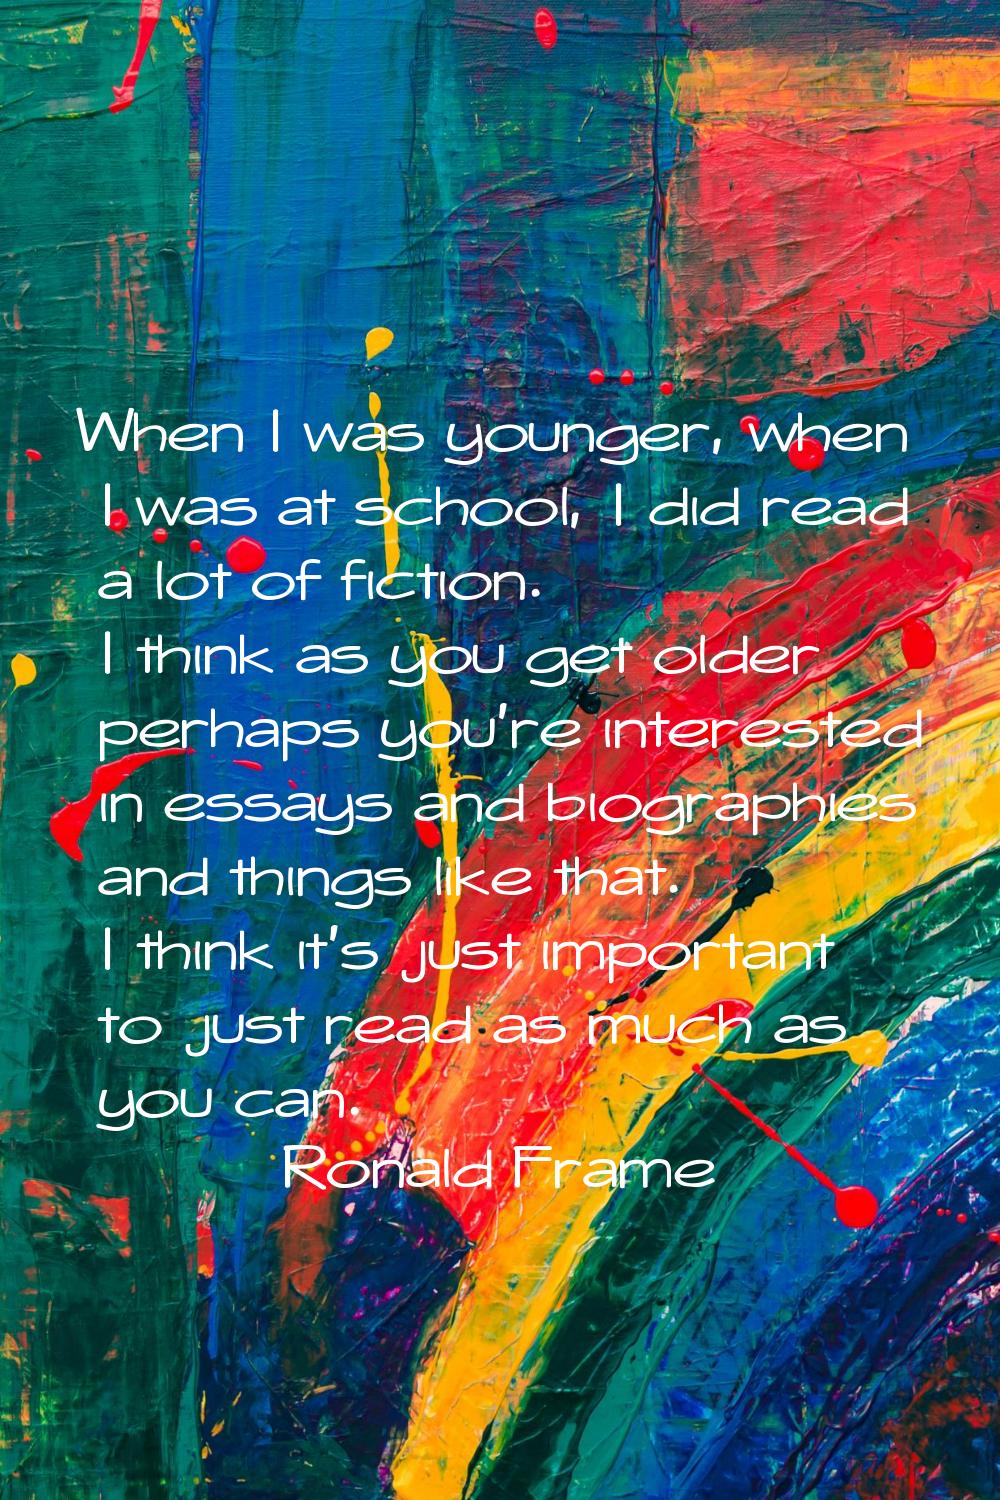 When I was younger, when I was at school, I did read a lot of fiction. I think as you get older per